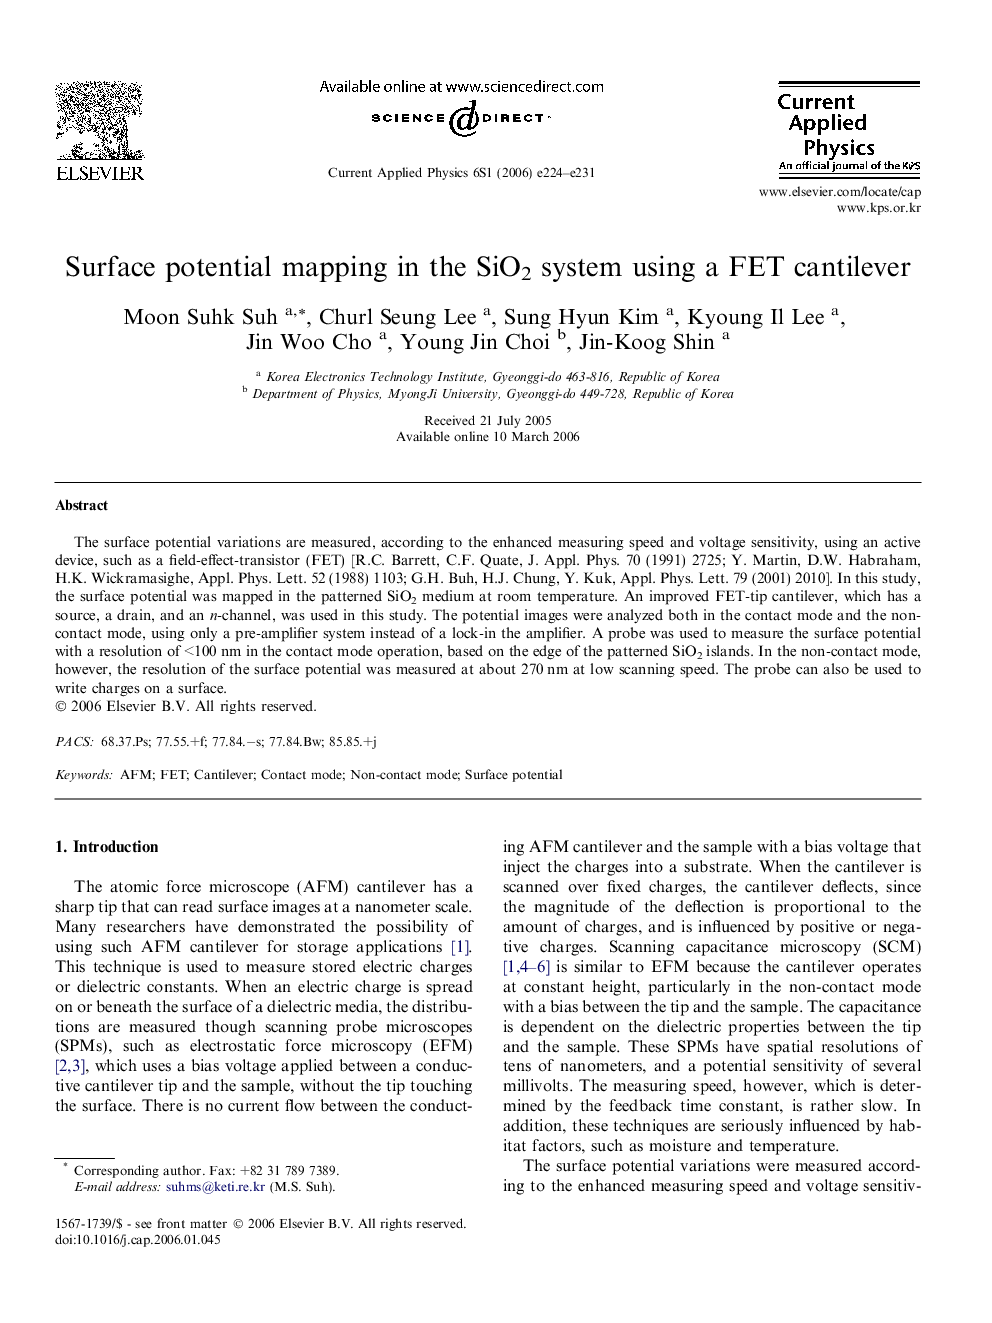 Surface potential mapping in the SiO2 system using a FET cantilever